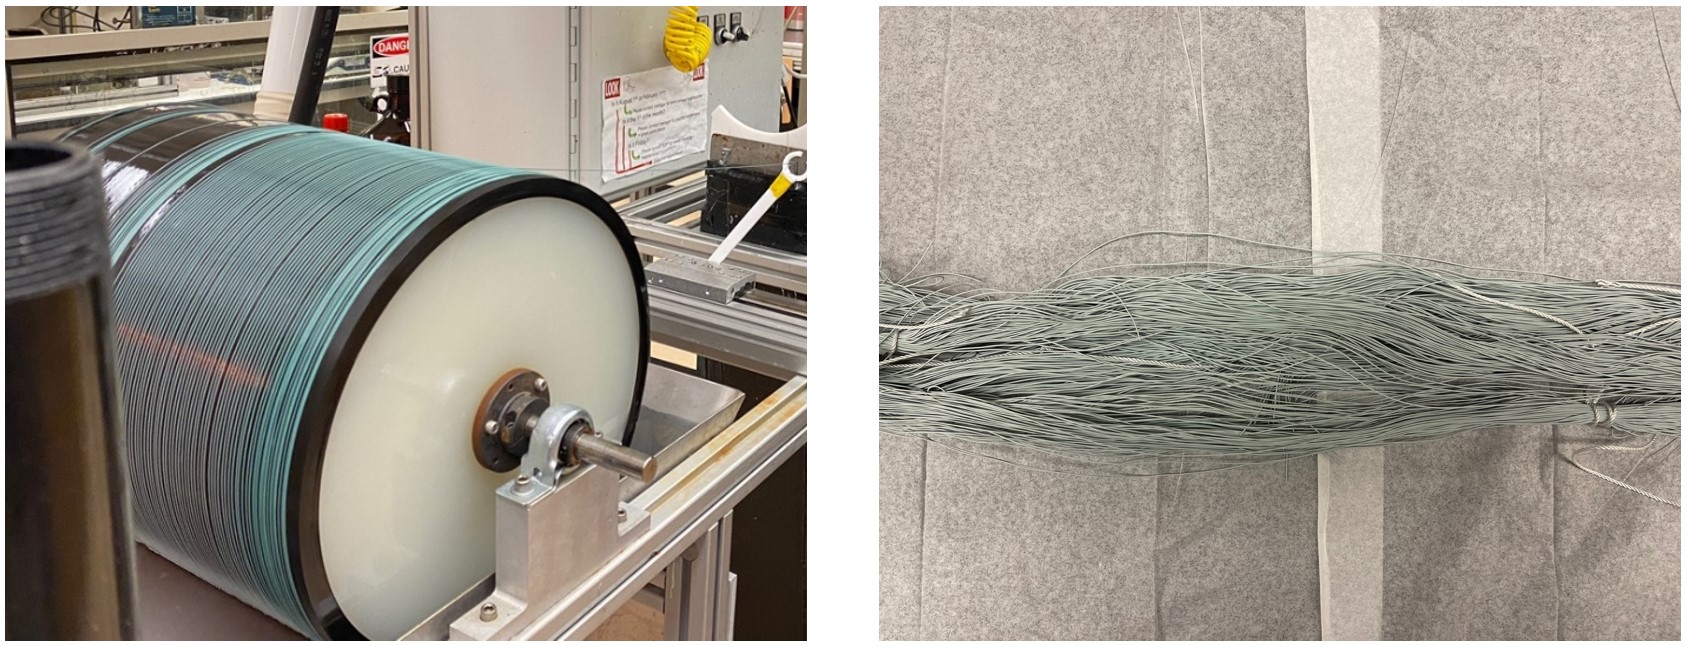 Figure 1. The physical appearance of the MIL-101(Cr)/cellulose acetate fibers during the spinning process (left) and when they are dried (right).